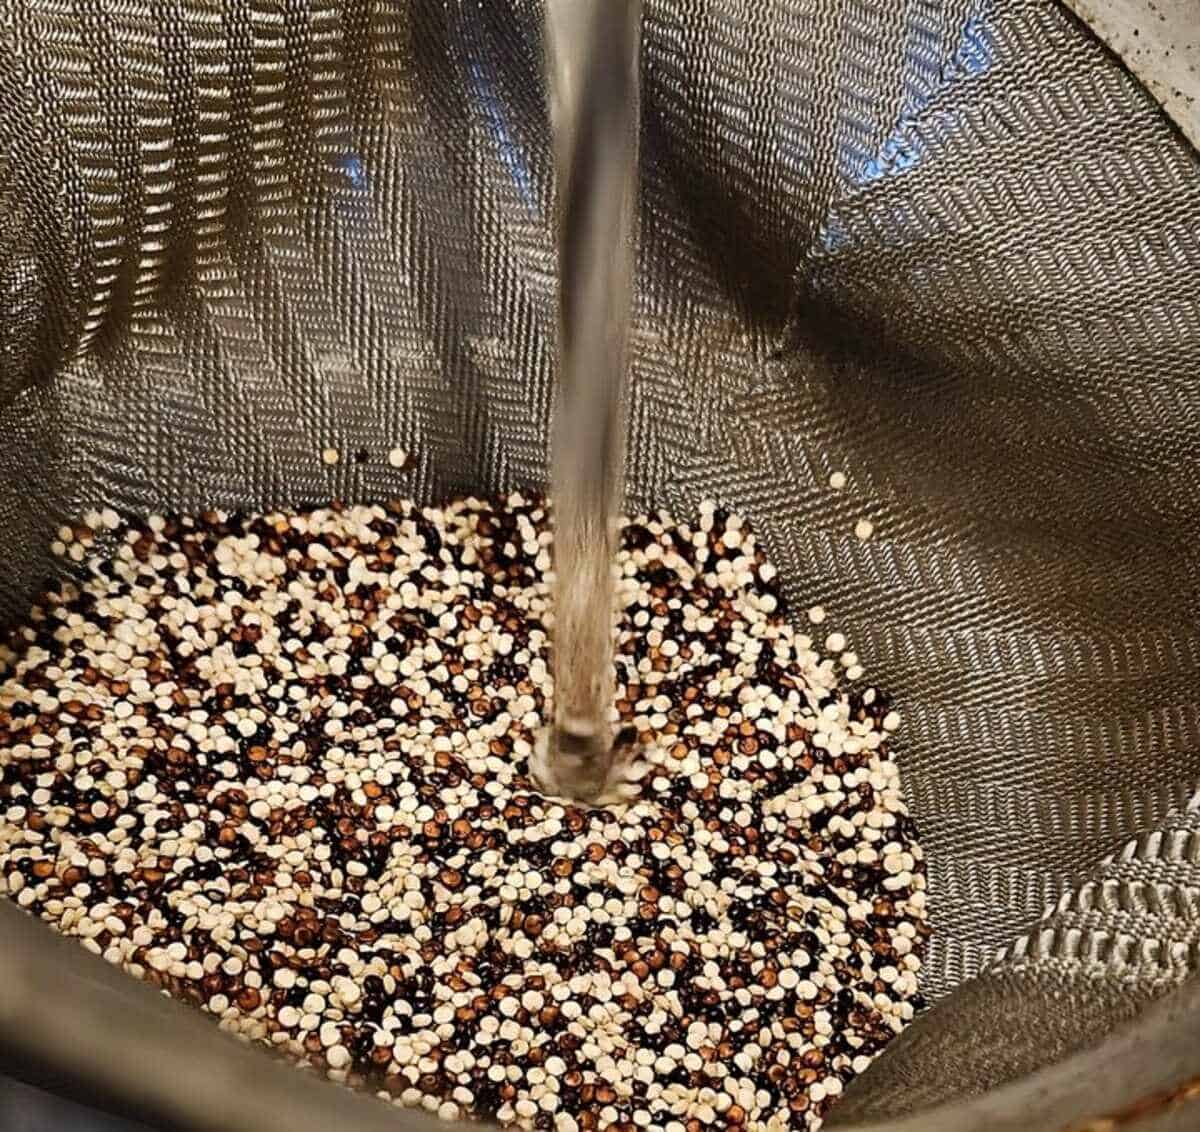 rinsing the raw quinoa with cold water in a fine mesh strainer.